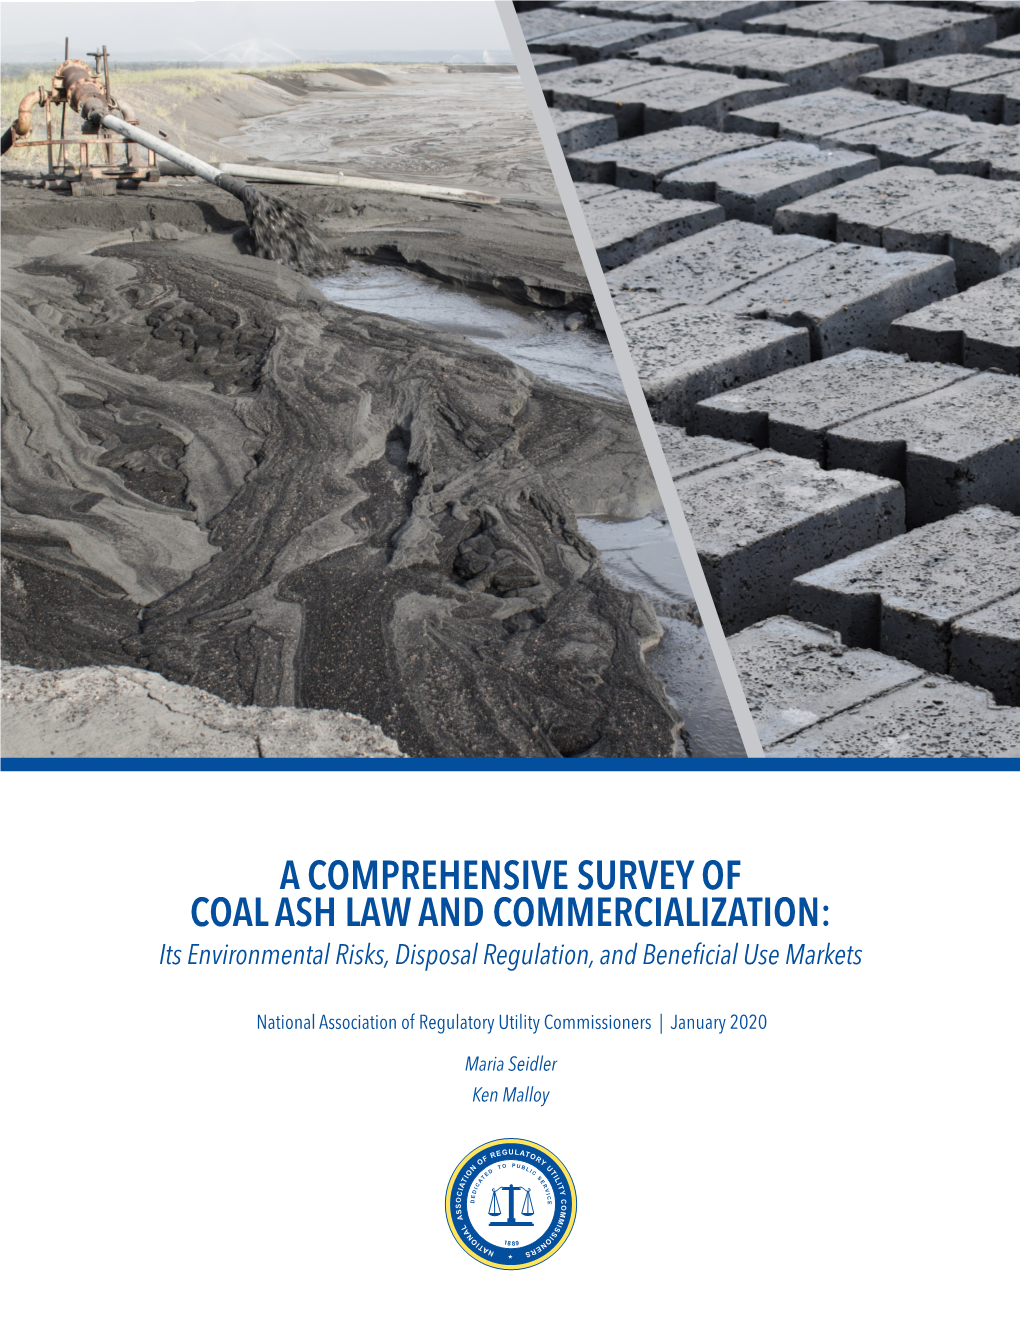 A COMPREHENSIVE SURVEY of COAL ASH LAW and COMMERCIALIZATION: Its Environmental Risks, Disposal Regulation, and Beneficial Use Markets